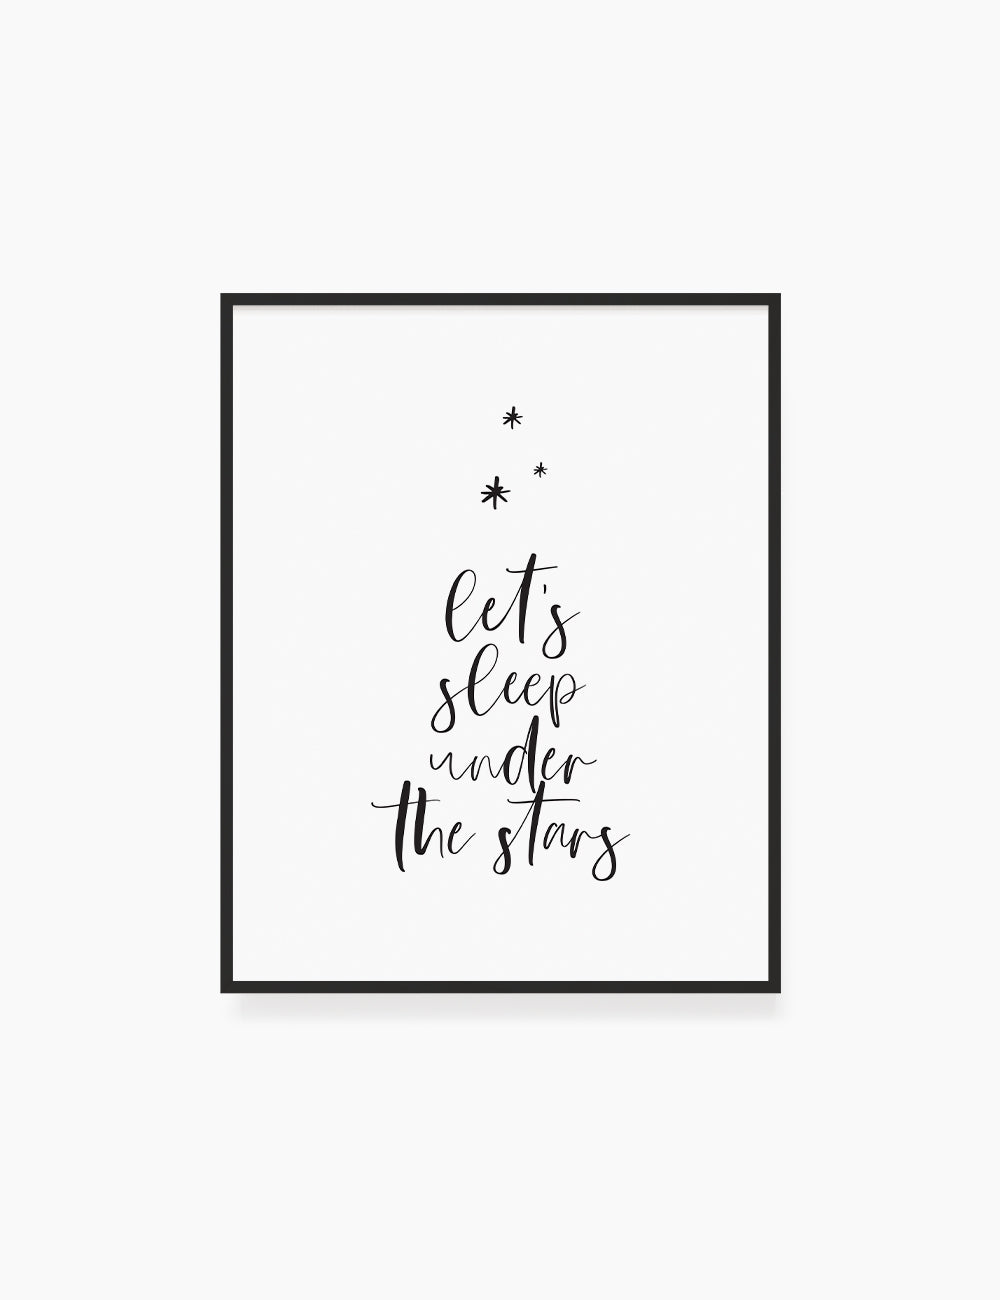 Printable Wall Art Quote: LET'S SLEEP UNDER THE STARS. Printable Poster. Stars Quote. WA030 - Paper Moon Art & Design